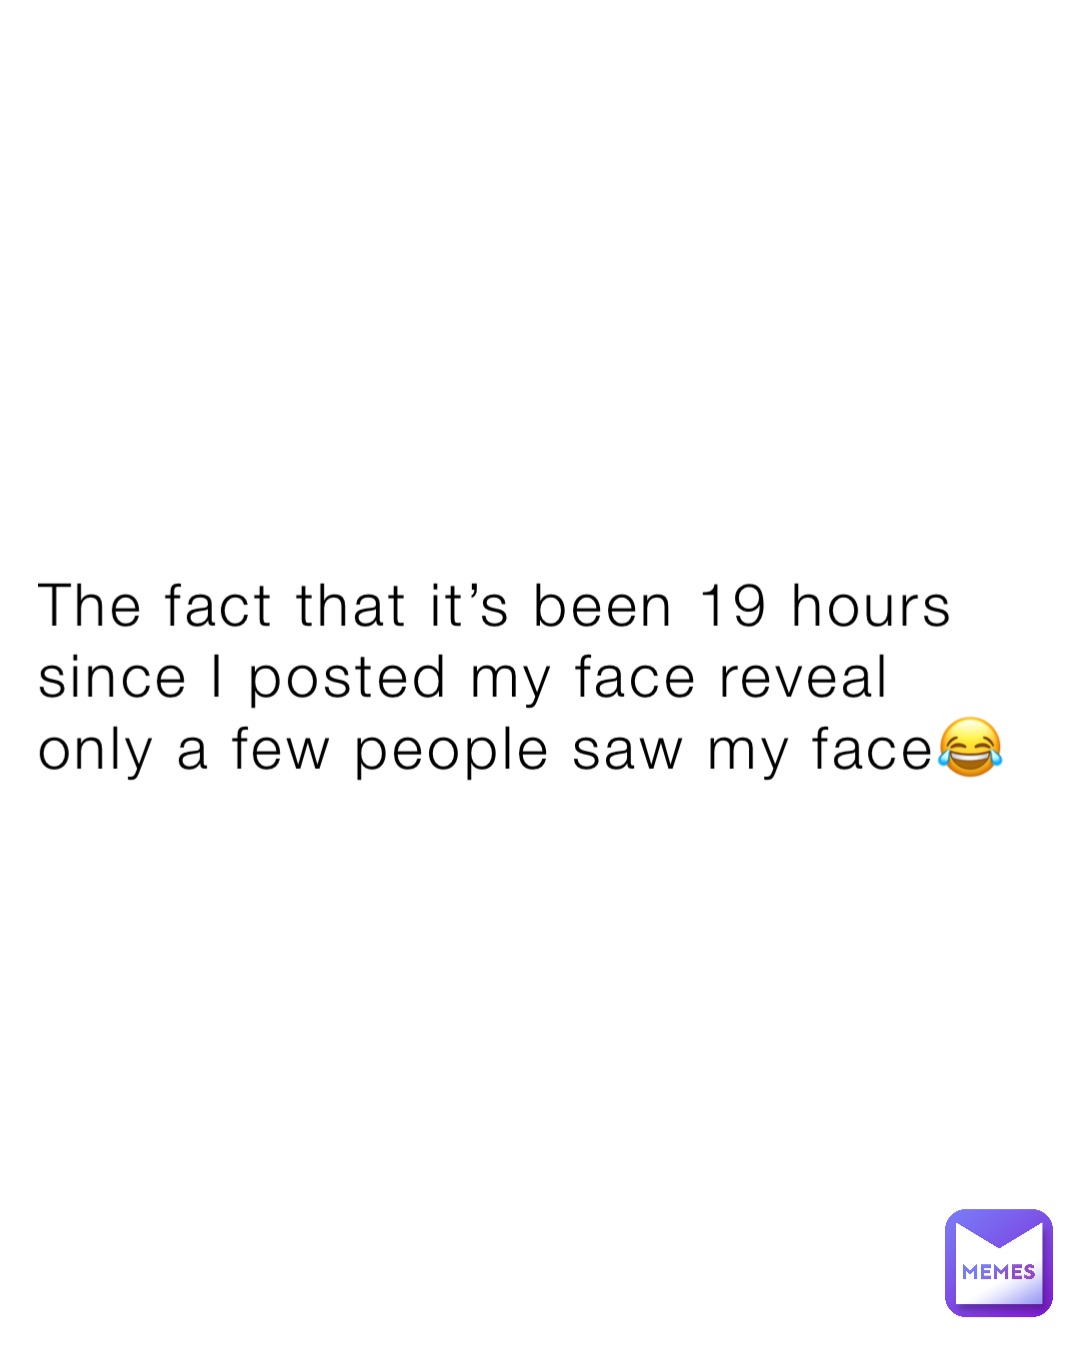 The fact that it’s been 19 hours since I posted my face reveal only a few people saw my face😂